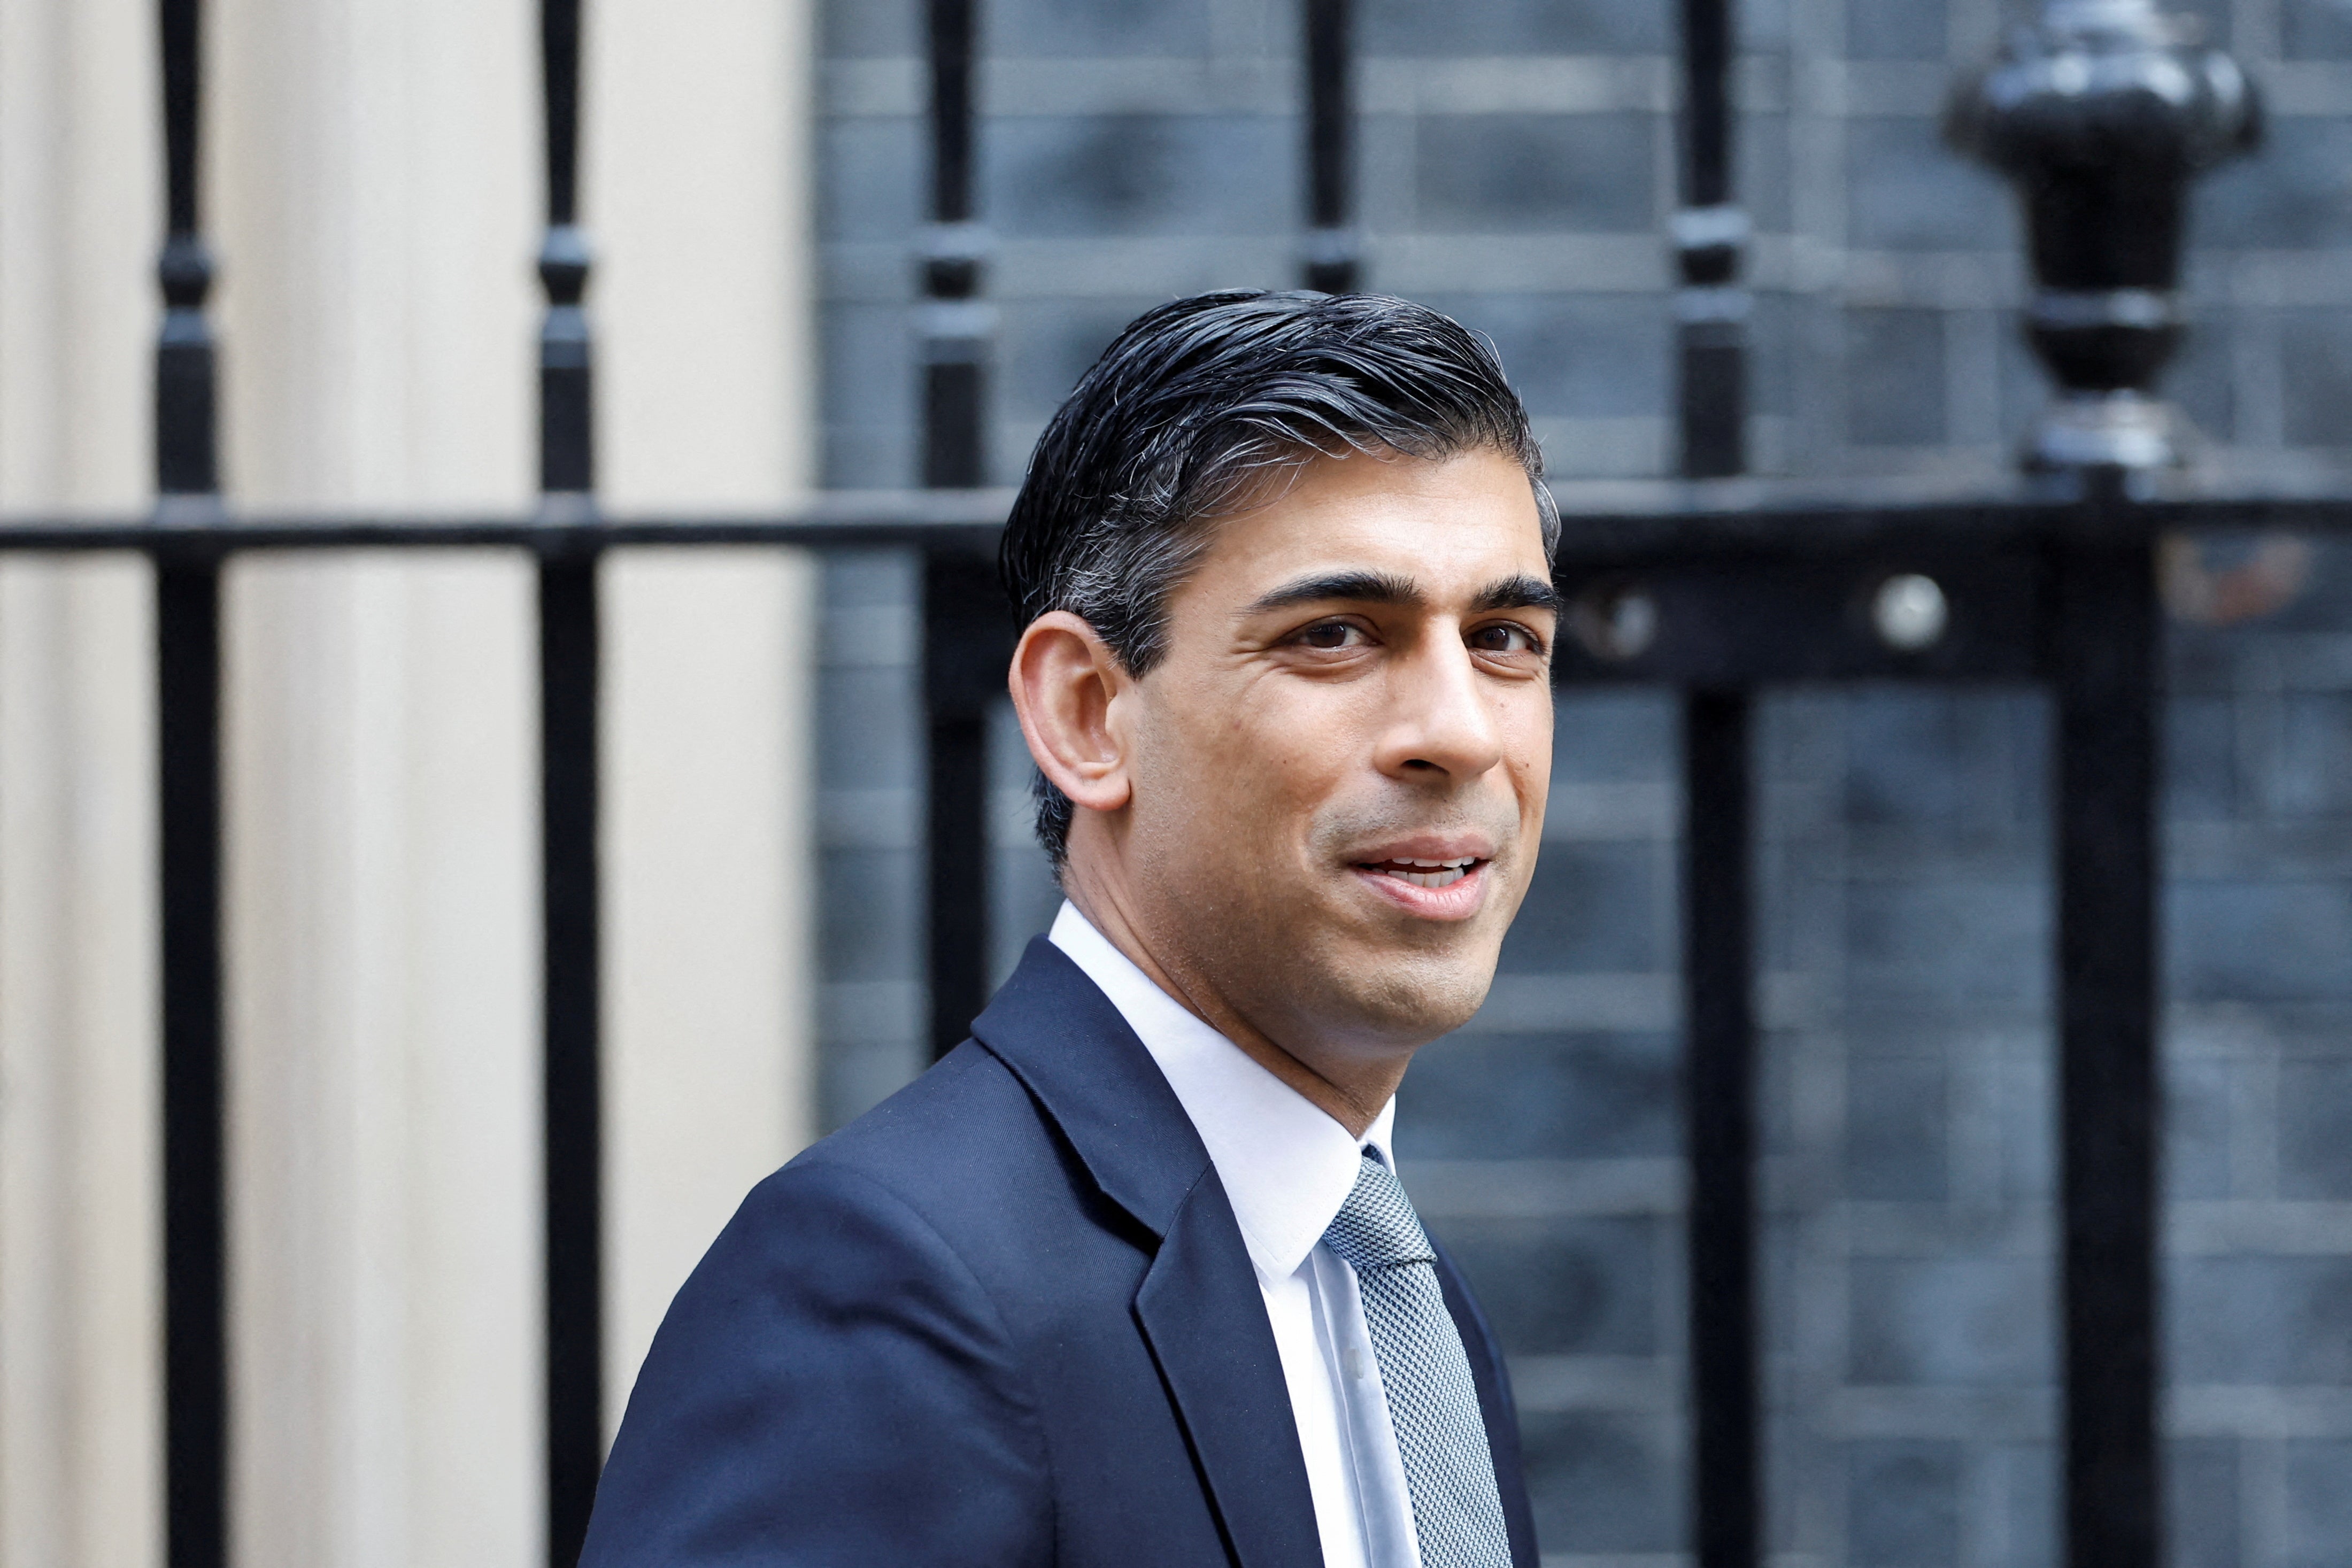 Political opponents and campaigners want Rishi Sunak to clarify his tax arrangements